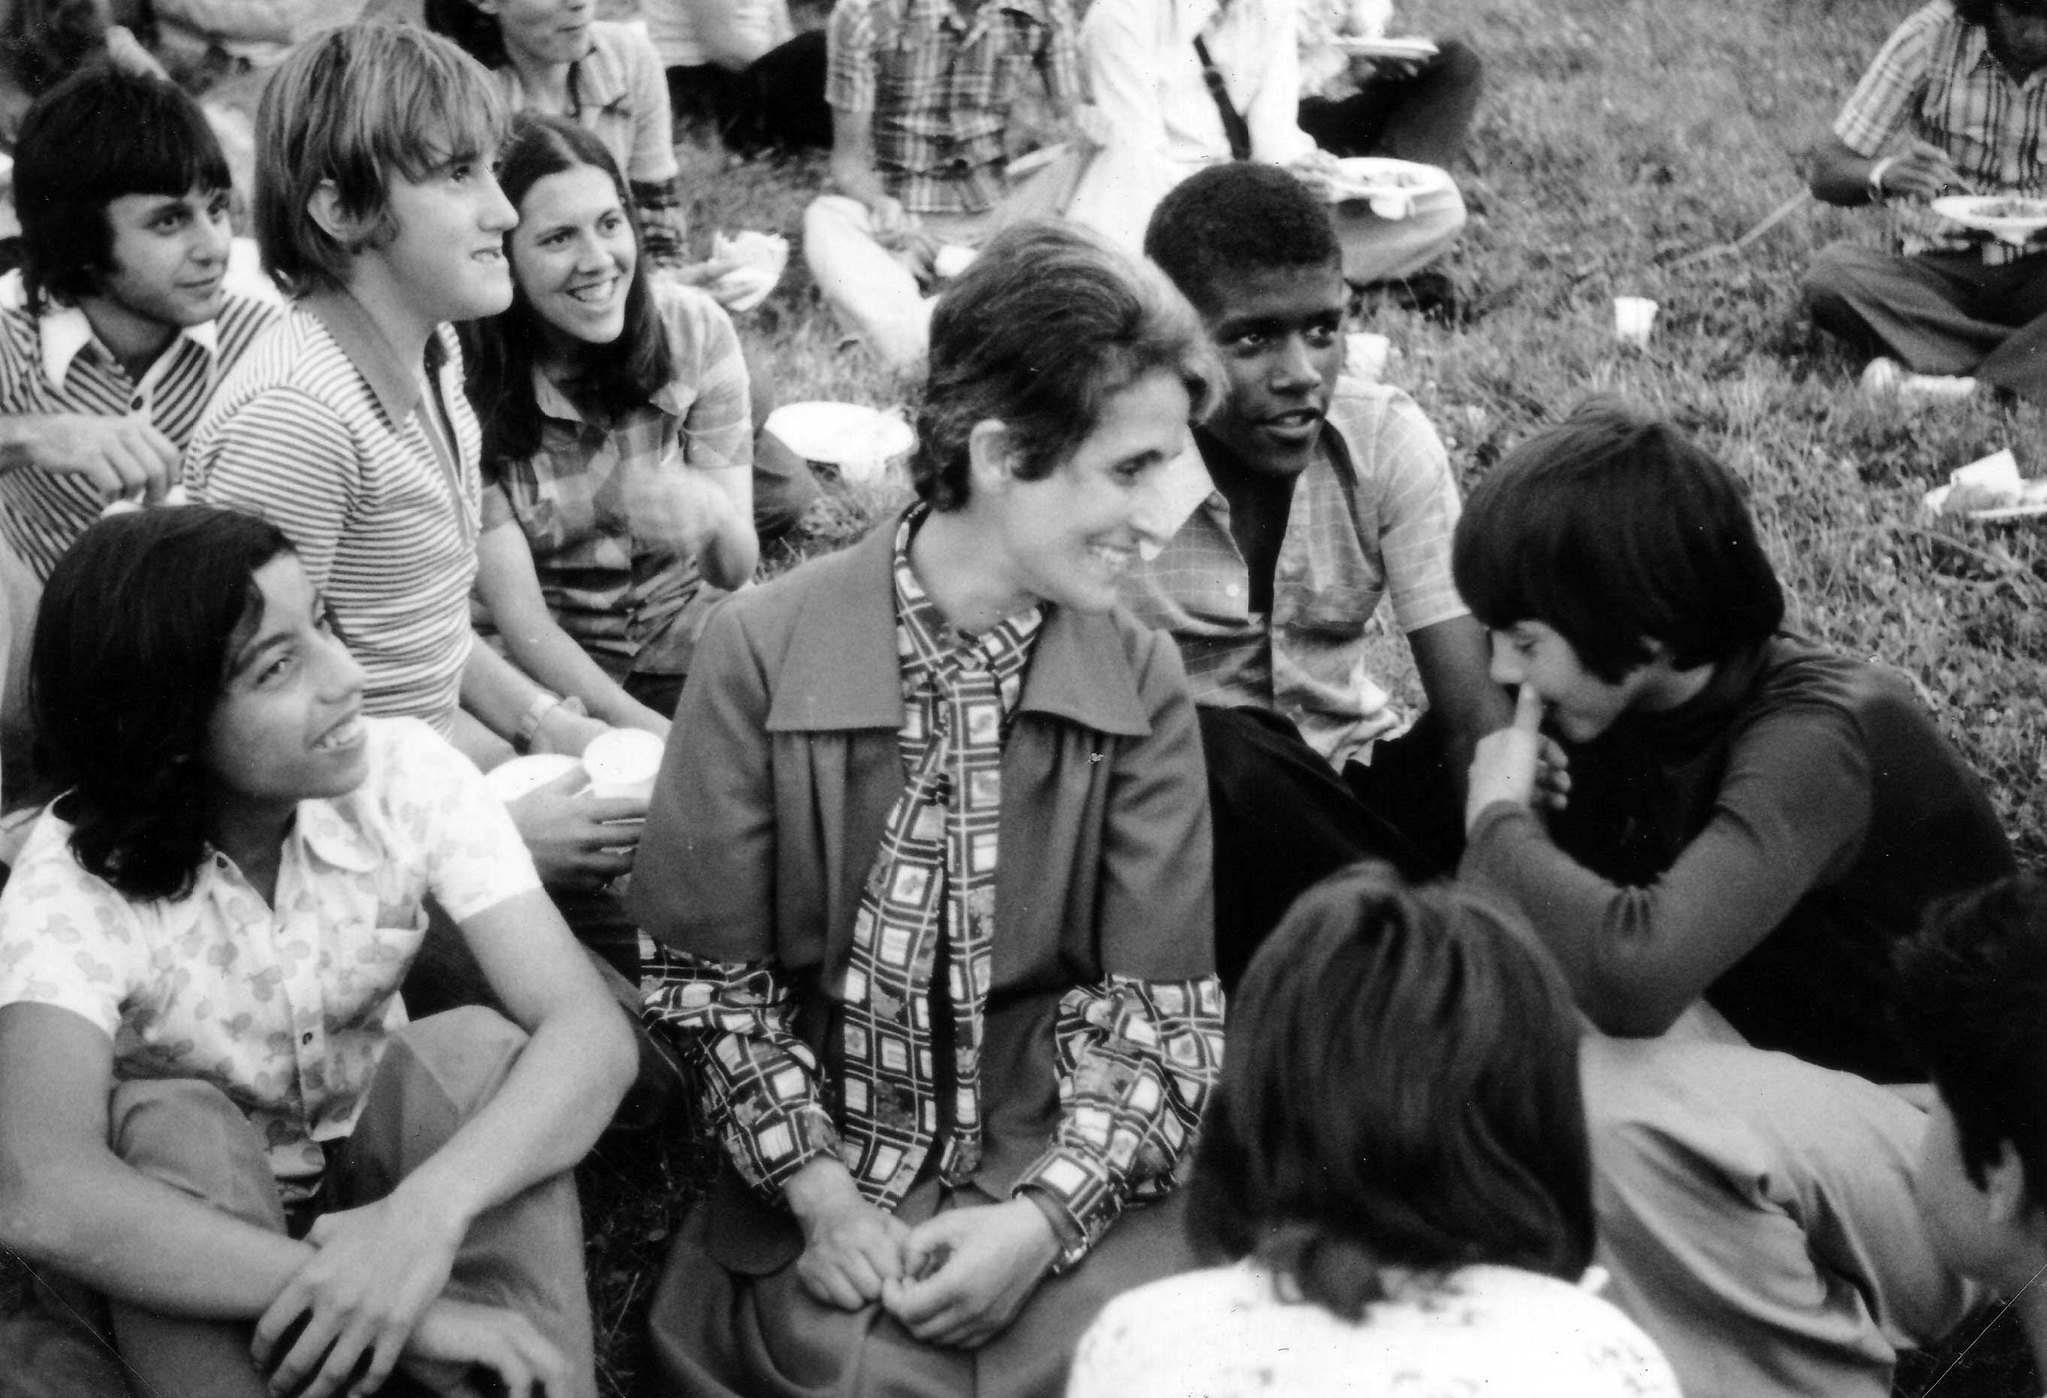 Renata with a group of young people